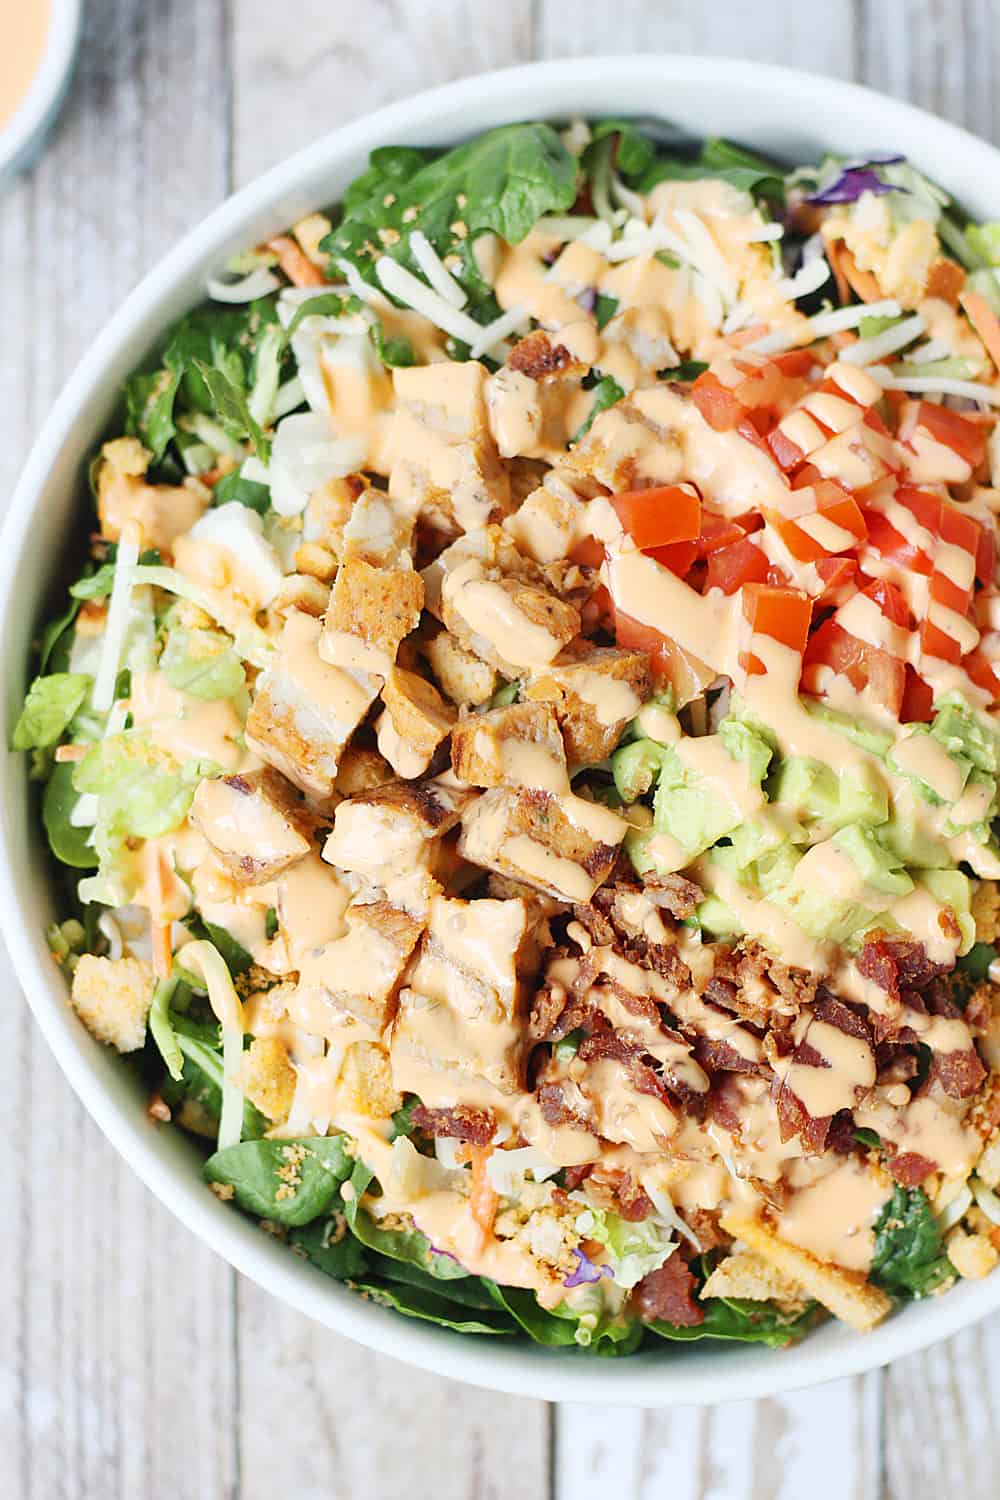 5-Minute Southwest BLT Chicken Salad -- This 5-minute southwest BLT chicken salad makes for an easy weeknight recipe. It's perfect for warm summer days or any time you need to quickly throw together a yummy, family-friendly meal!